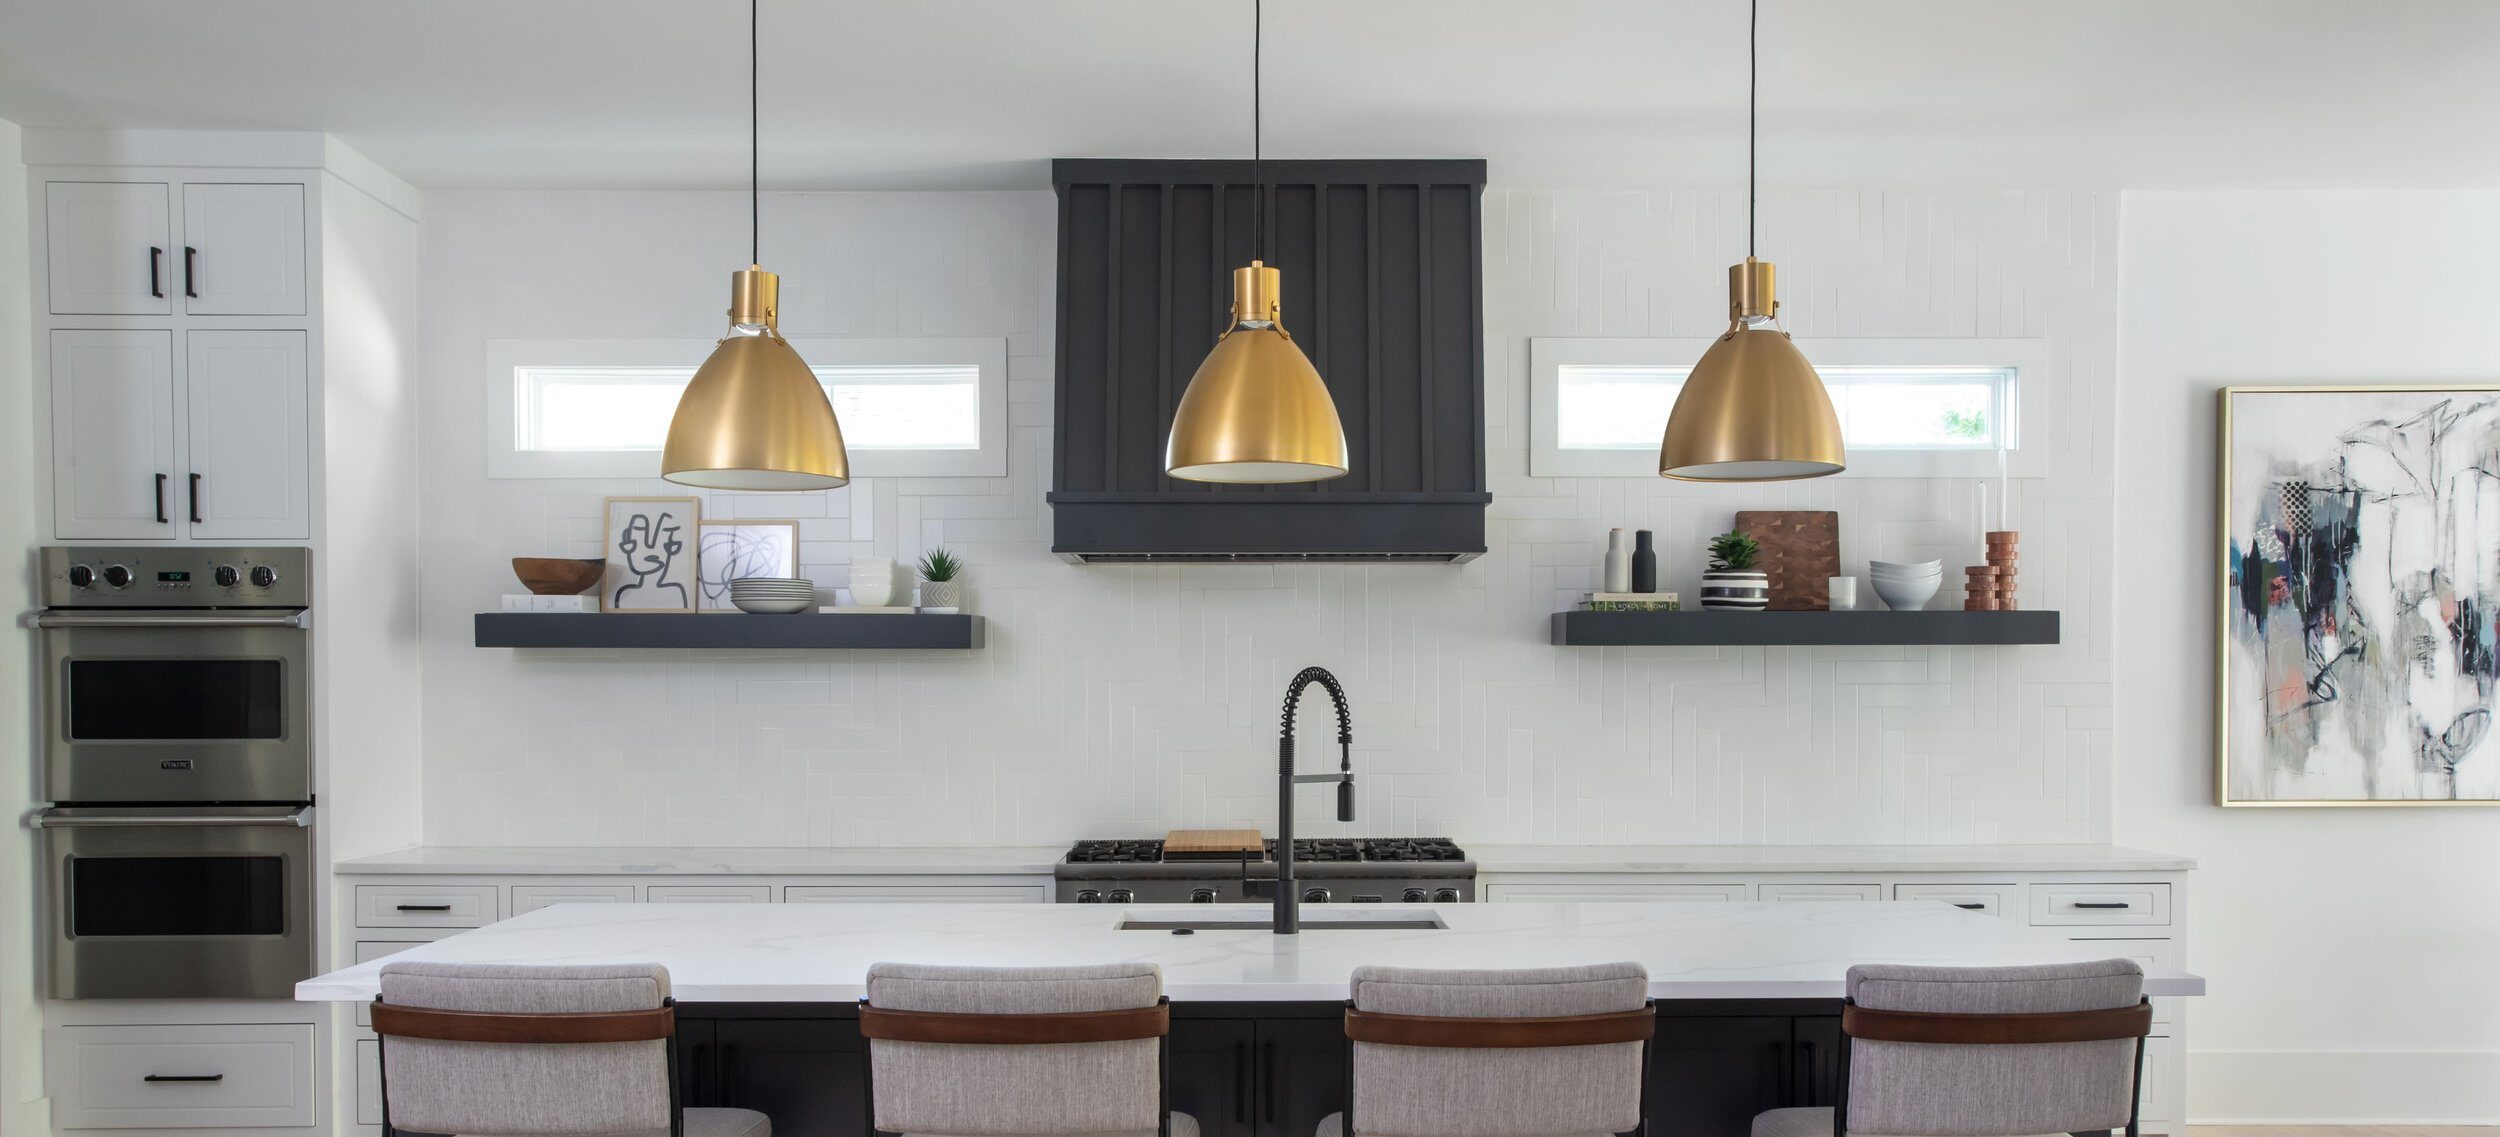 kitchen task lighting recommendations        <h3 class=